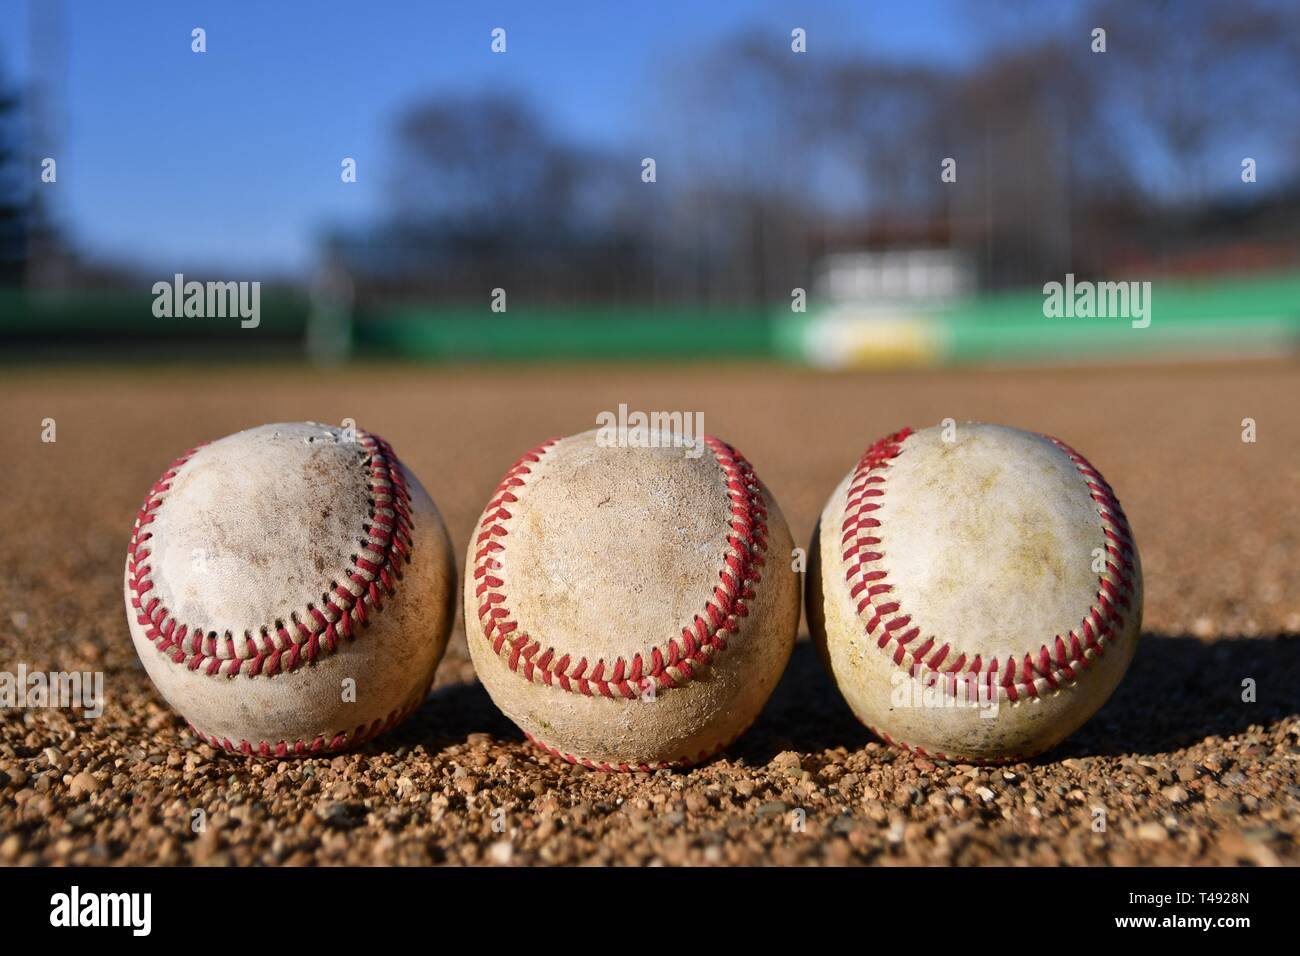 Baseball In The Infield Stock Photo - Download Image Now